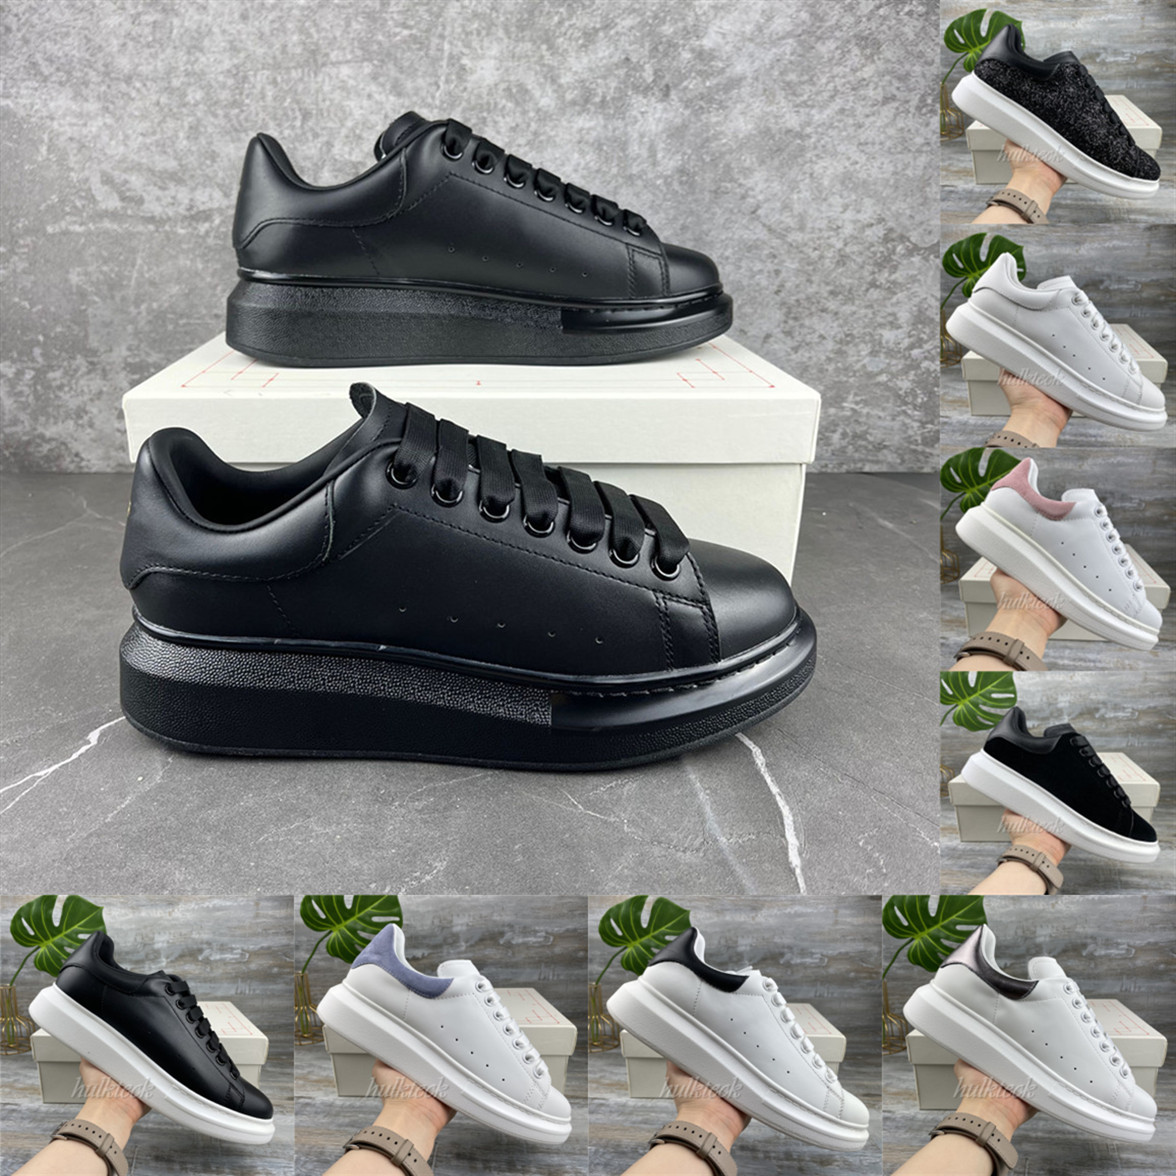 

Mens Womens Casual Shoes Platform Sneakers AM Chaussures Luxe Pour Hommes Et Femmes Baskets a Plateforme Decontractees Women Sports Trainers With Box, 01